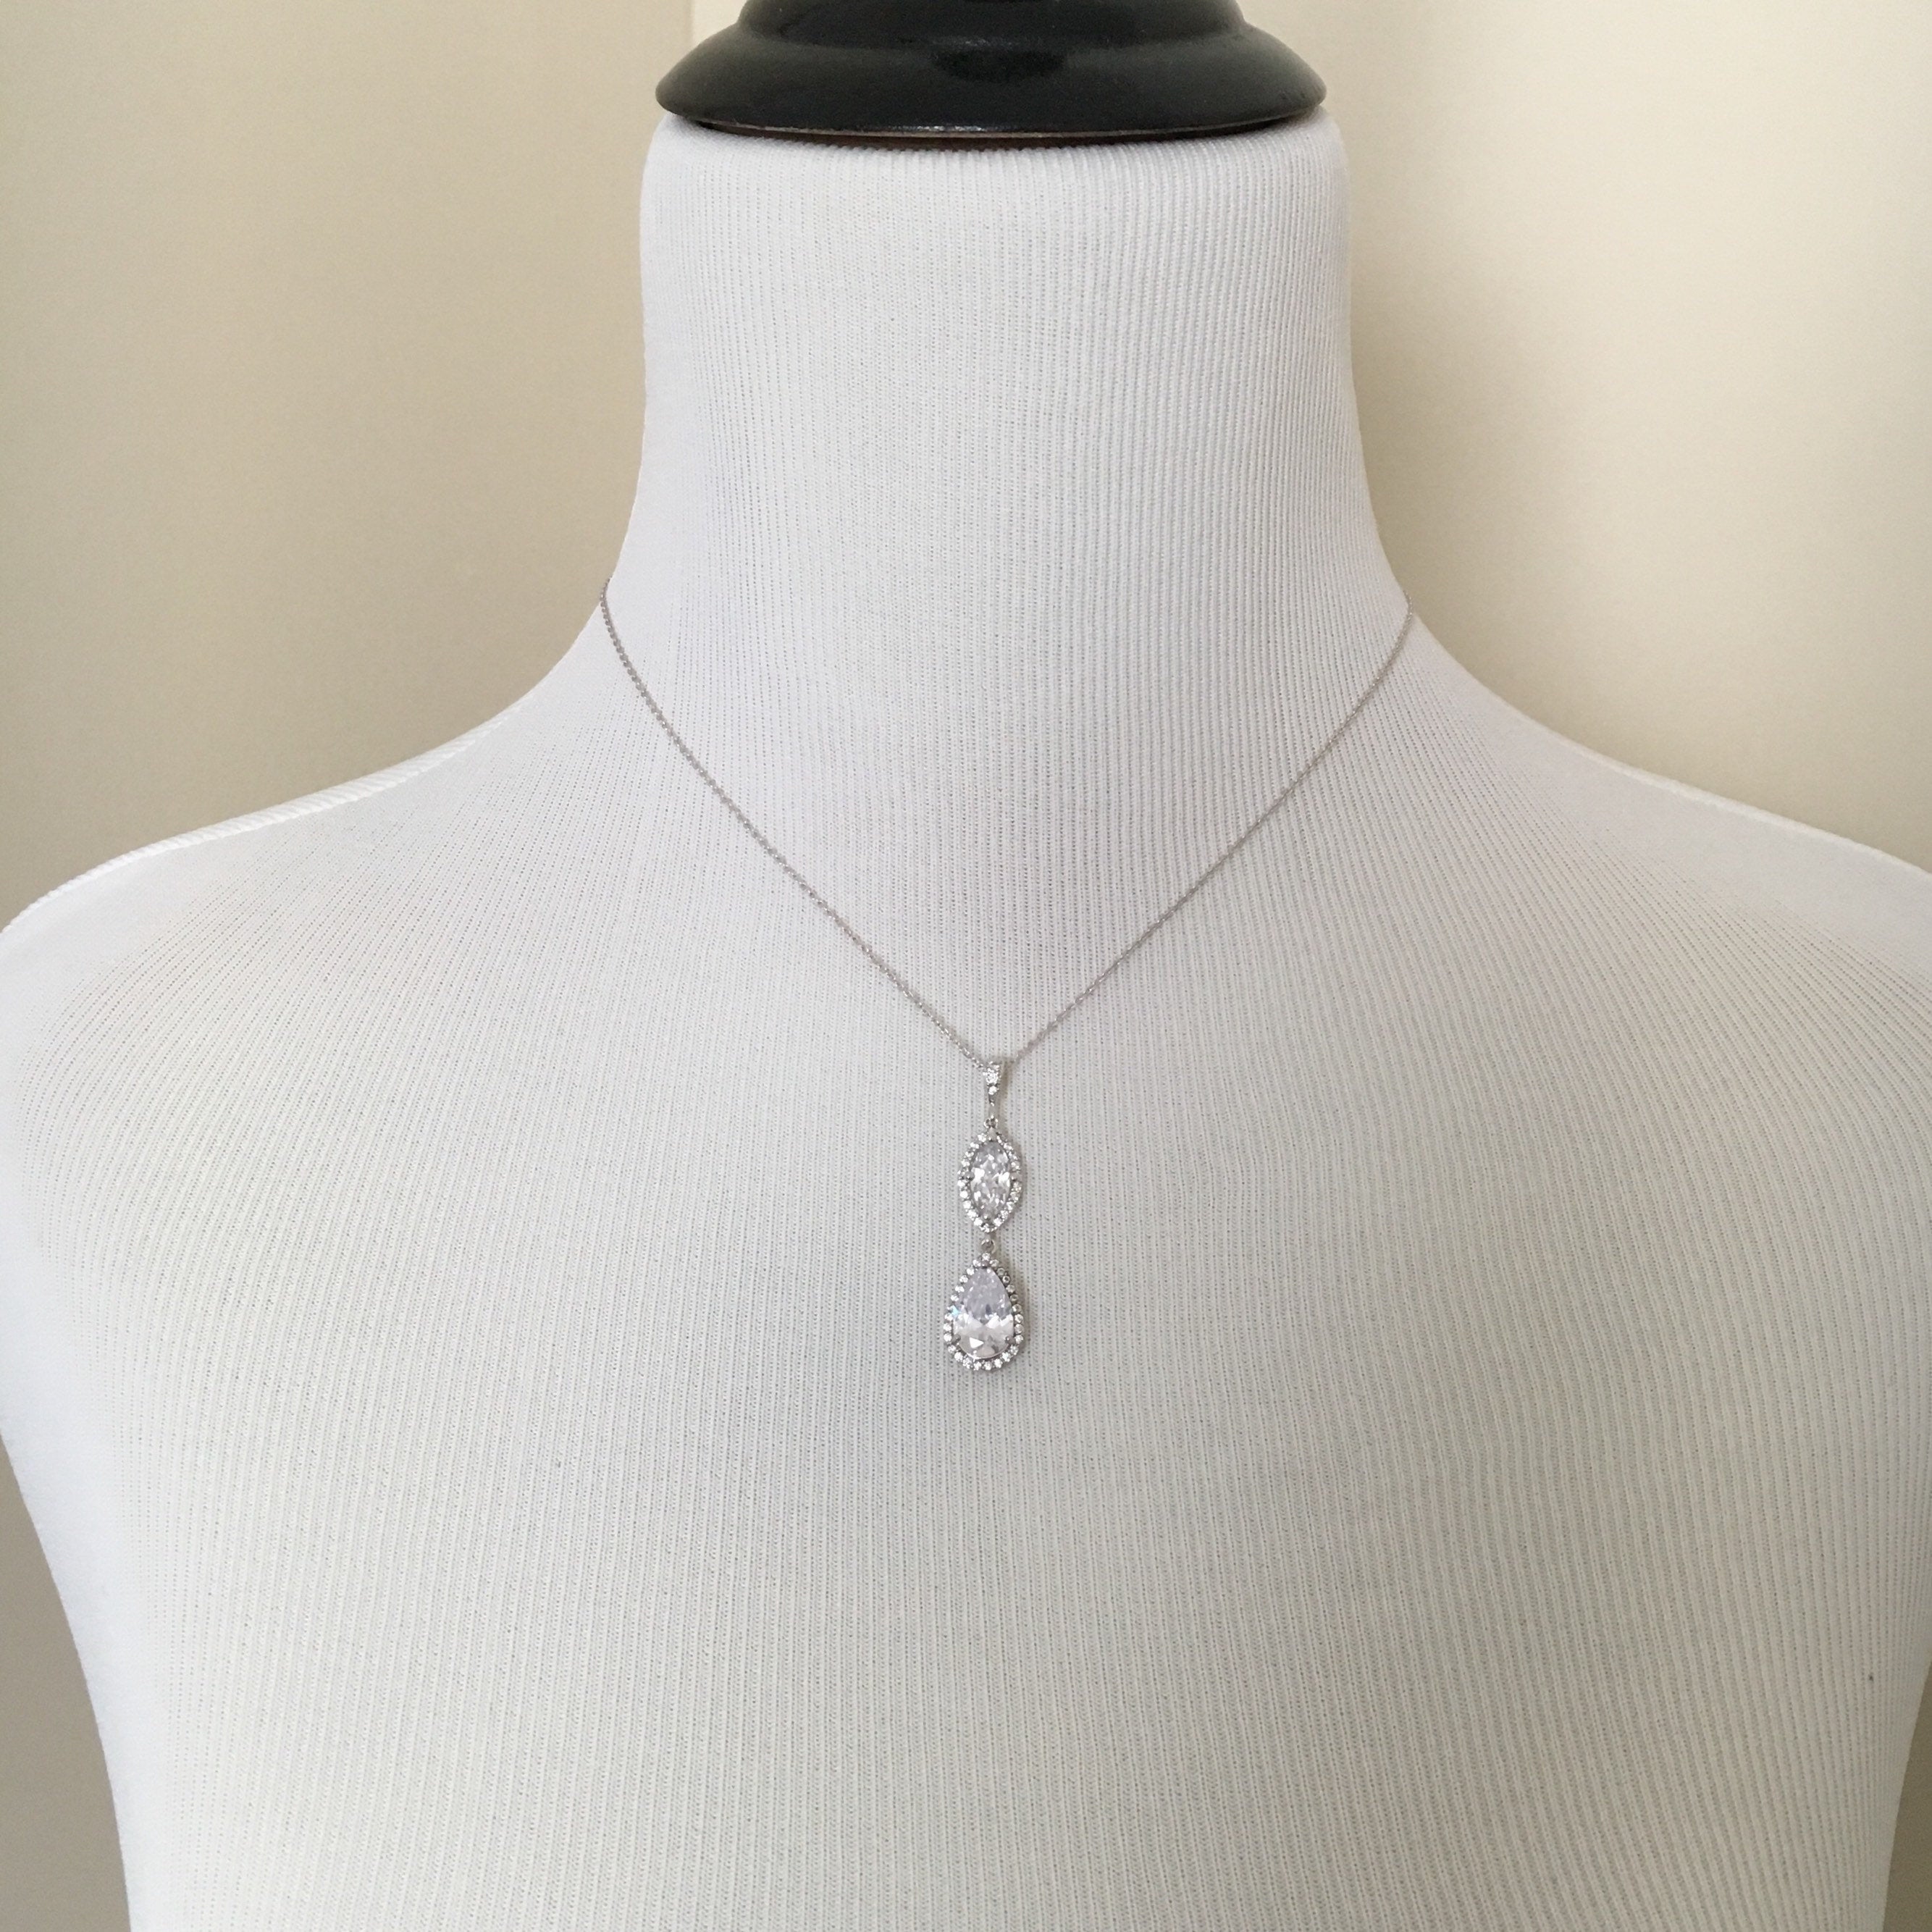 Mannequin wearing Cubic zirconia crystals set in silver color rhodium plated brass pendant necklace.